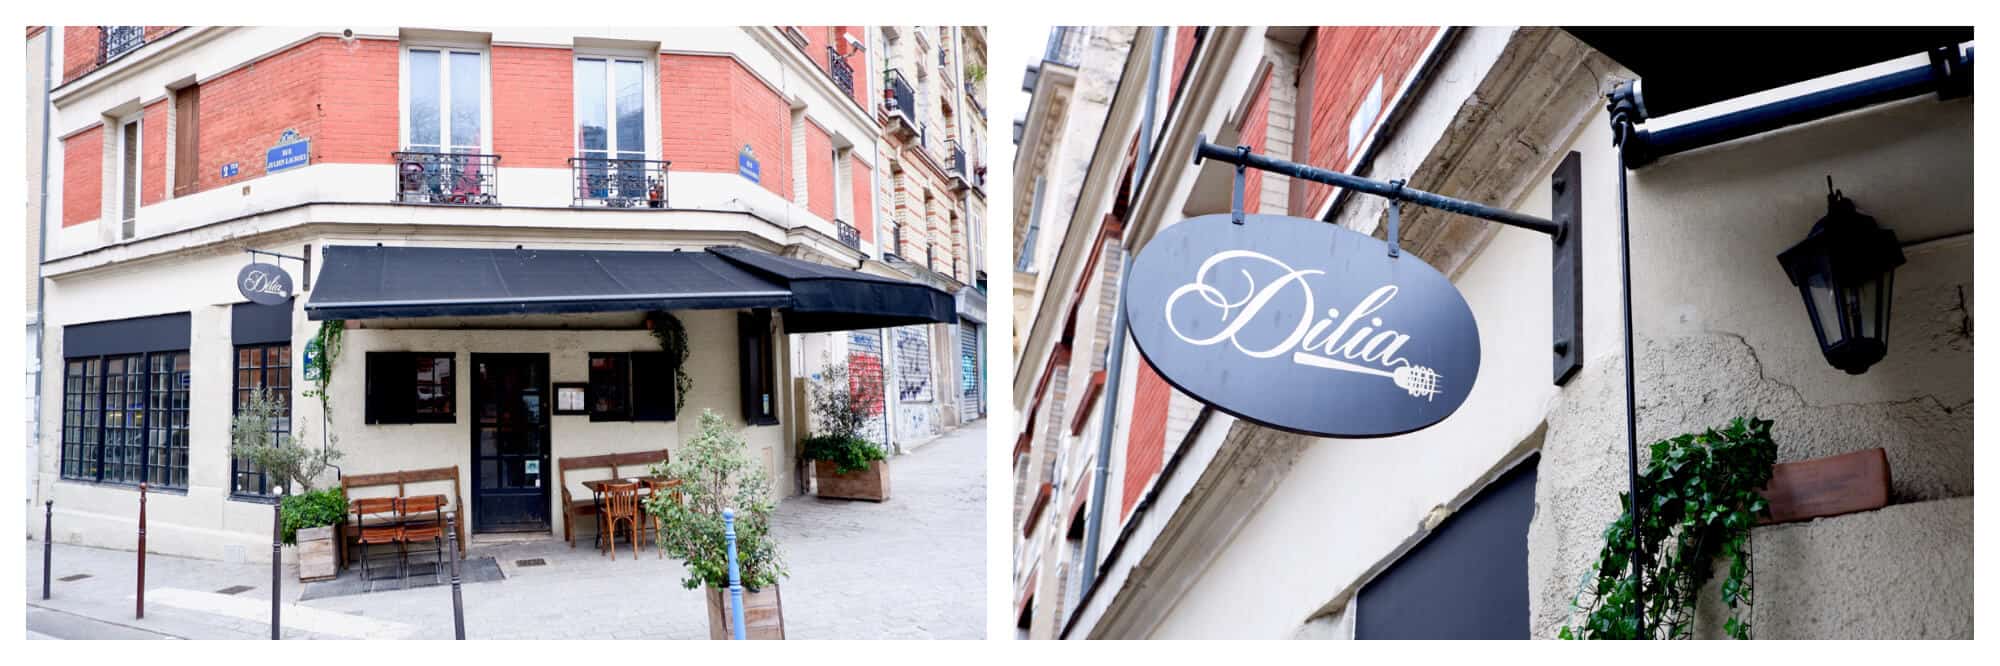 Left: the facade of a restaurant. The window frames and awning are black and there are two wooden tables and chairs on either side of the front door. Right: a close up of the restaurant's sign. The sign is black with the name of the restaurant 'Dilia' written in cursive.